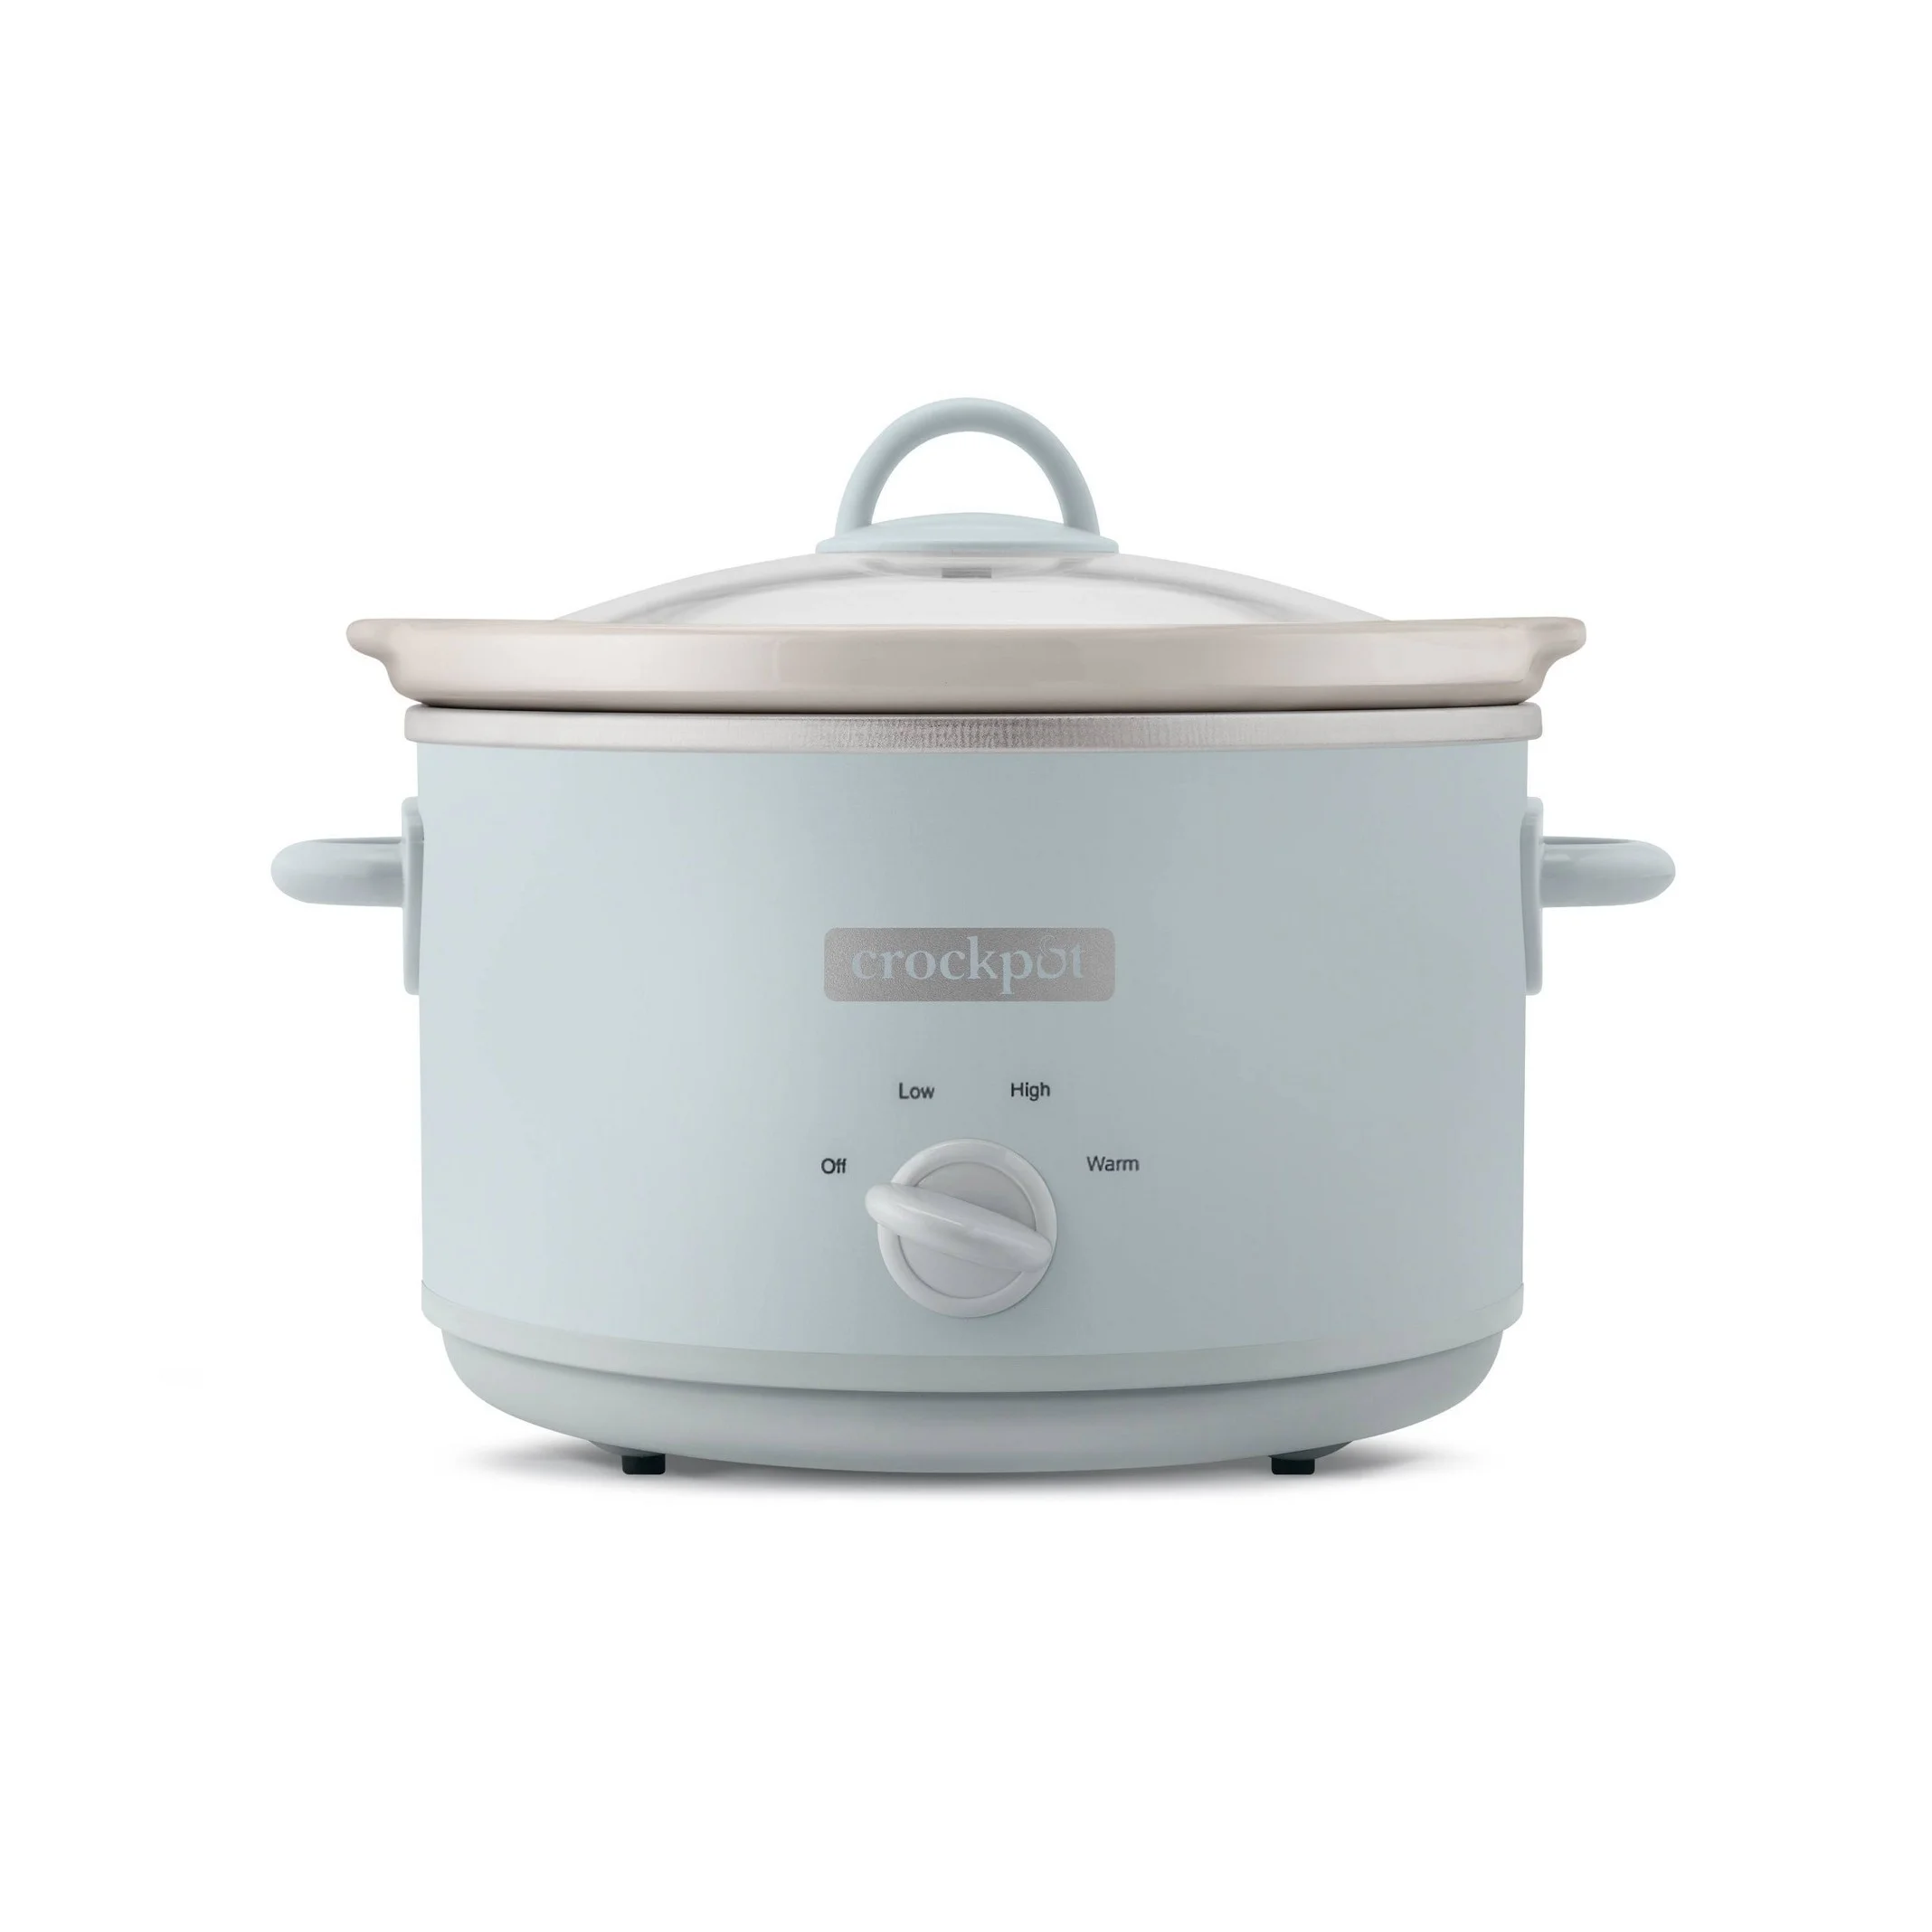 Crock Pot Slow Cookers as low as $19.99! Check these out